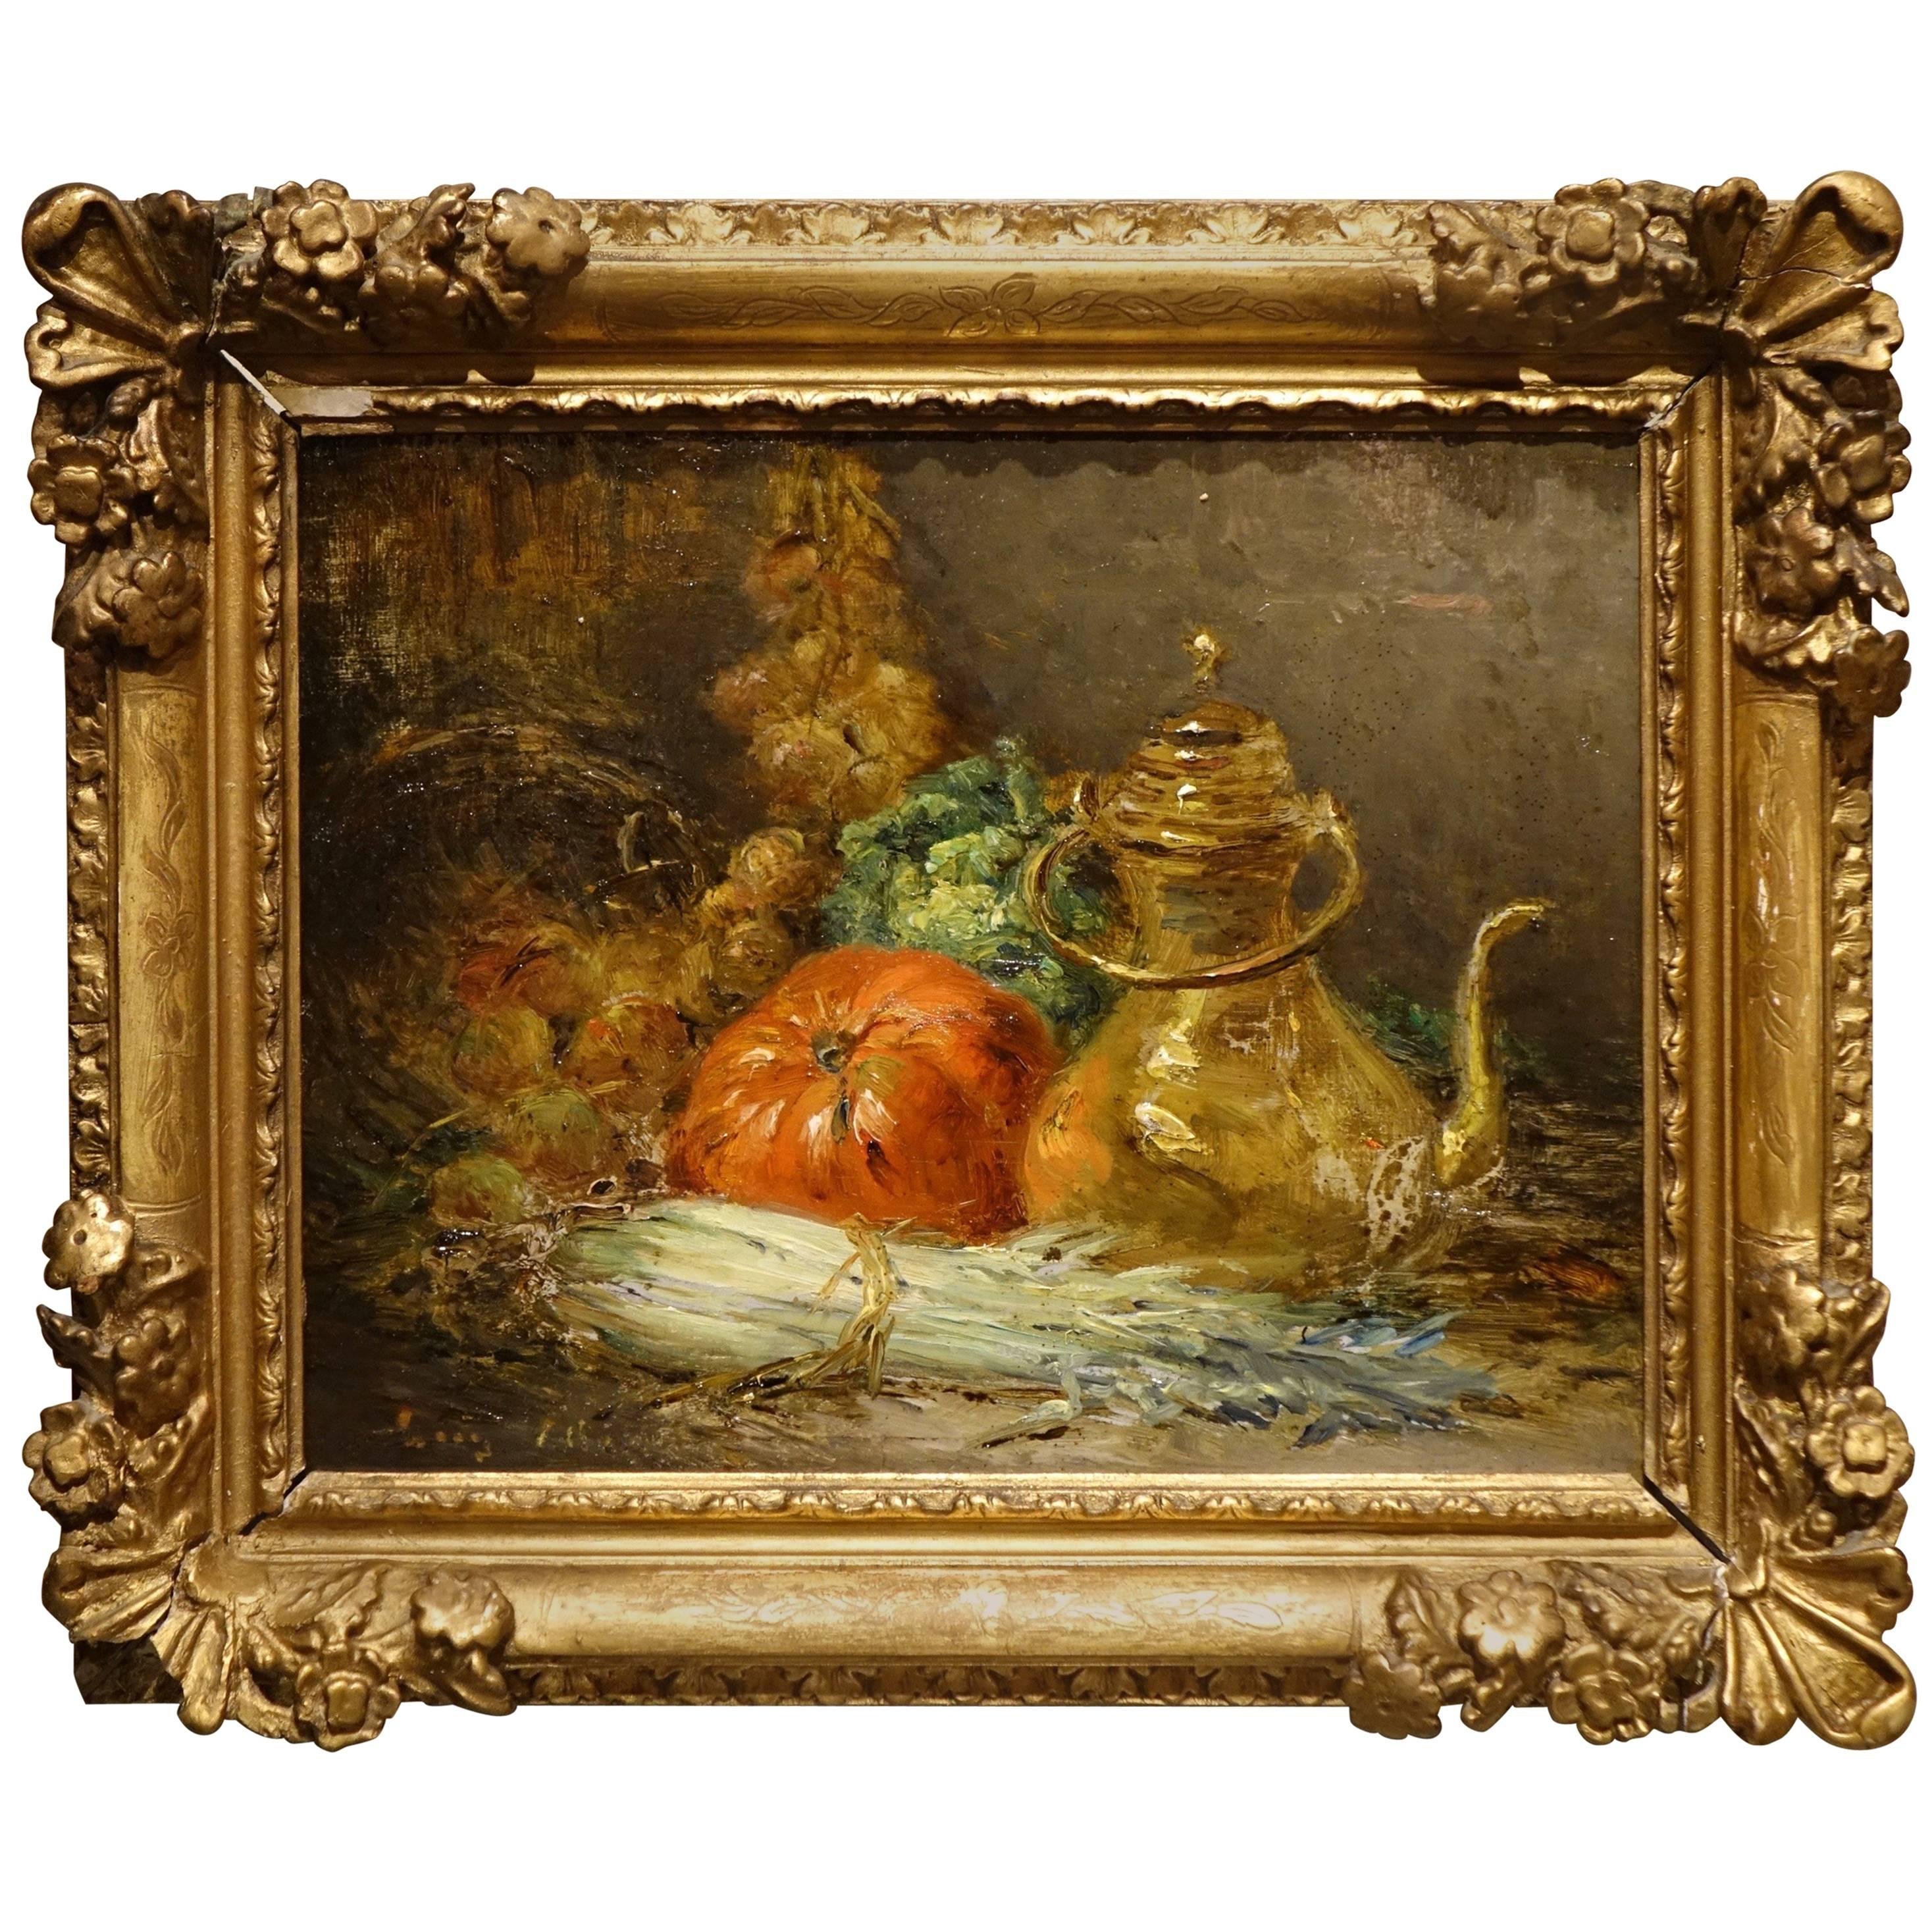  A painting "Still Life With Vegetables" oil on wood,  French School, circa 1880